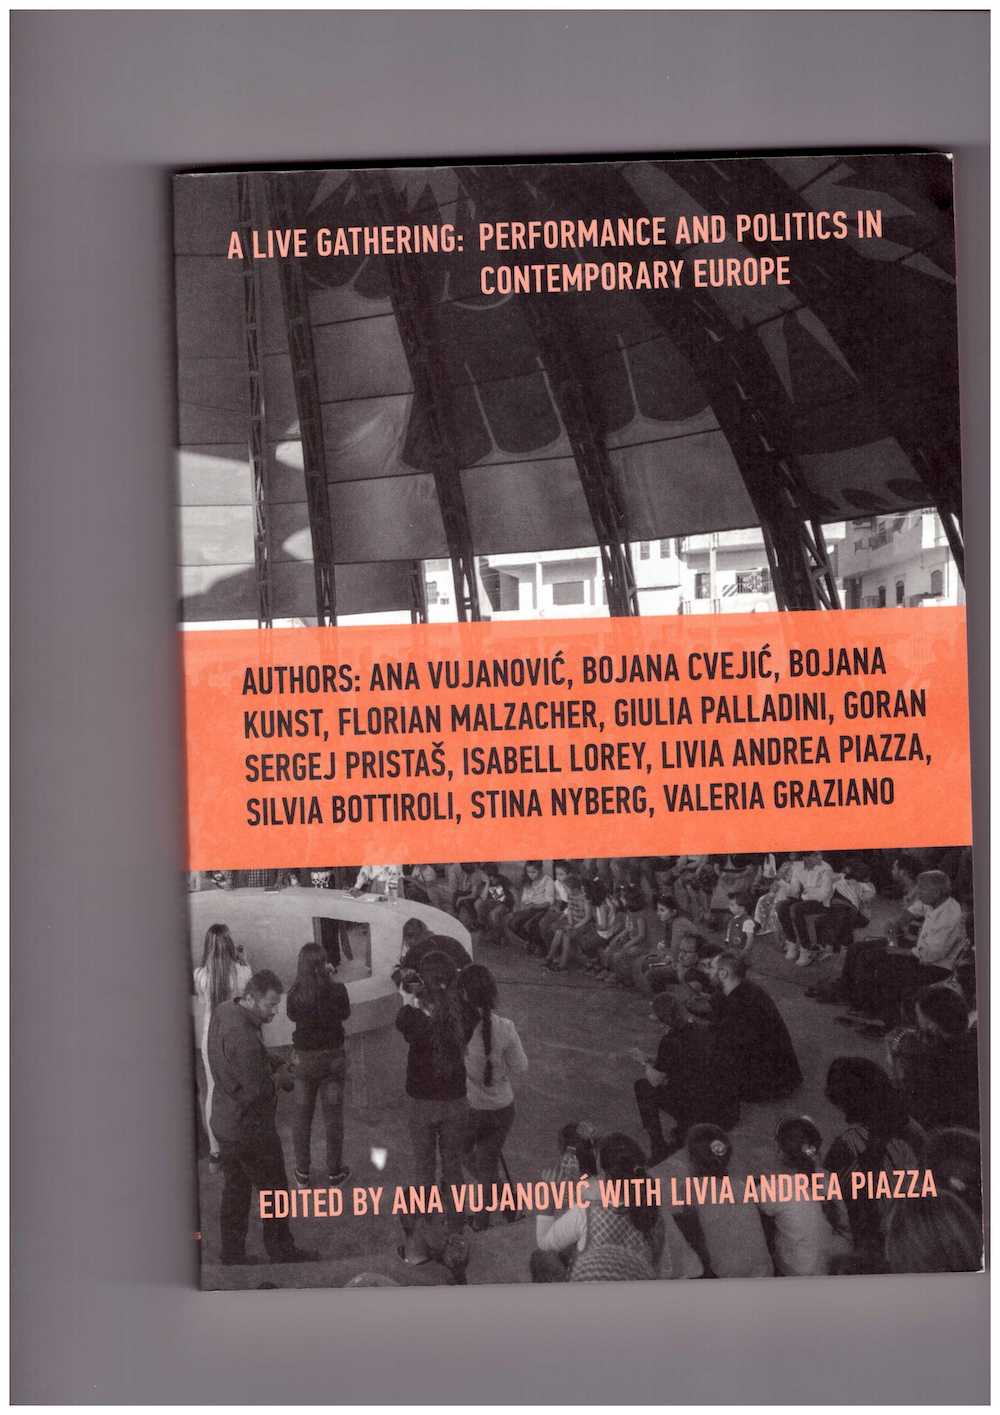 VUJANOVIC, Ana; PIAZZA, Livia Andrea (eds.) - A Live Gathering: Performance and Politics in Contemporary Europe